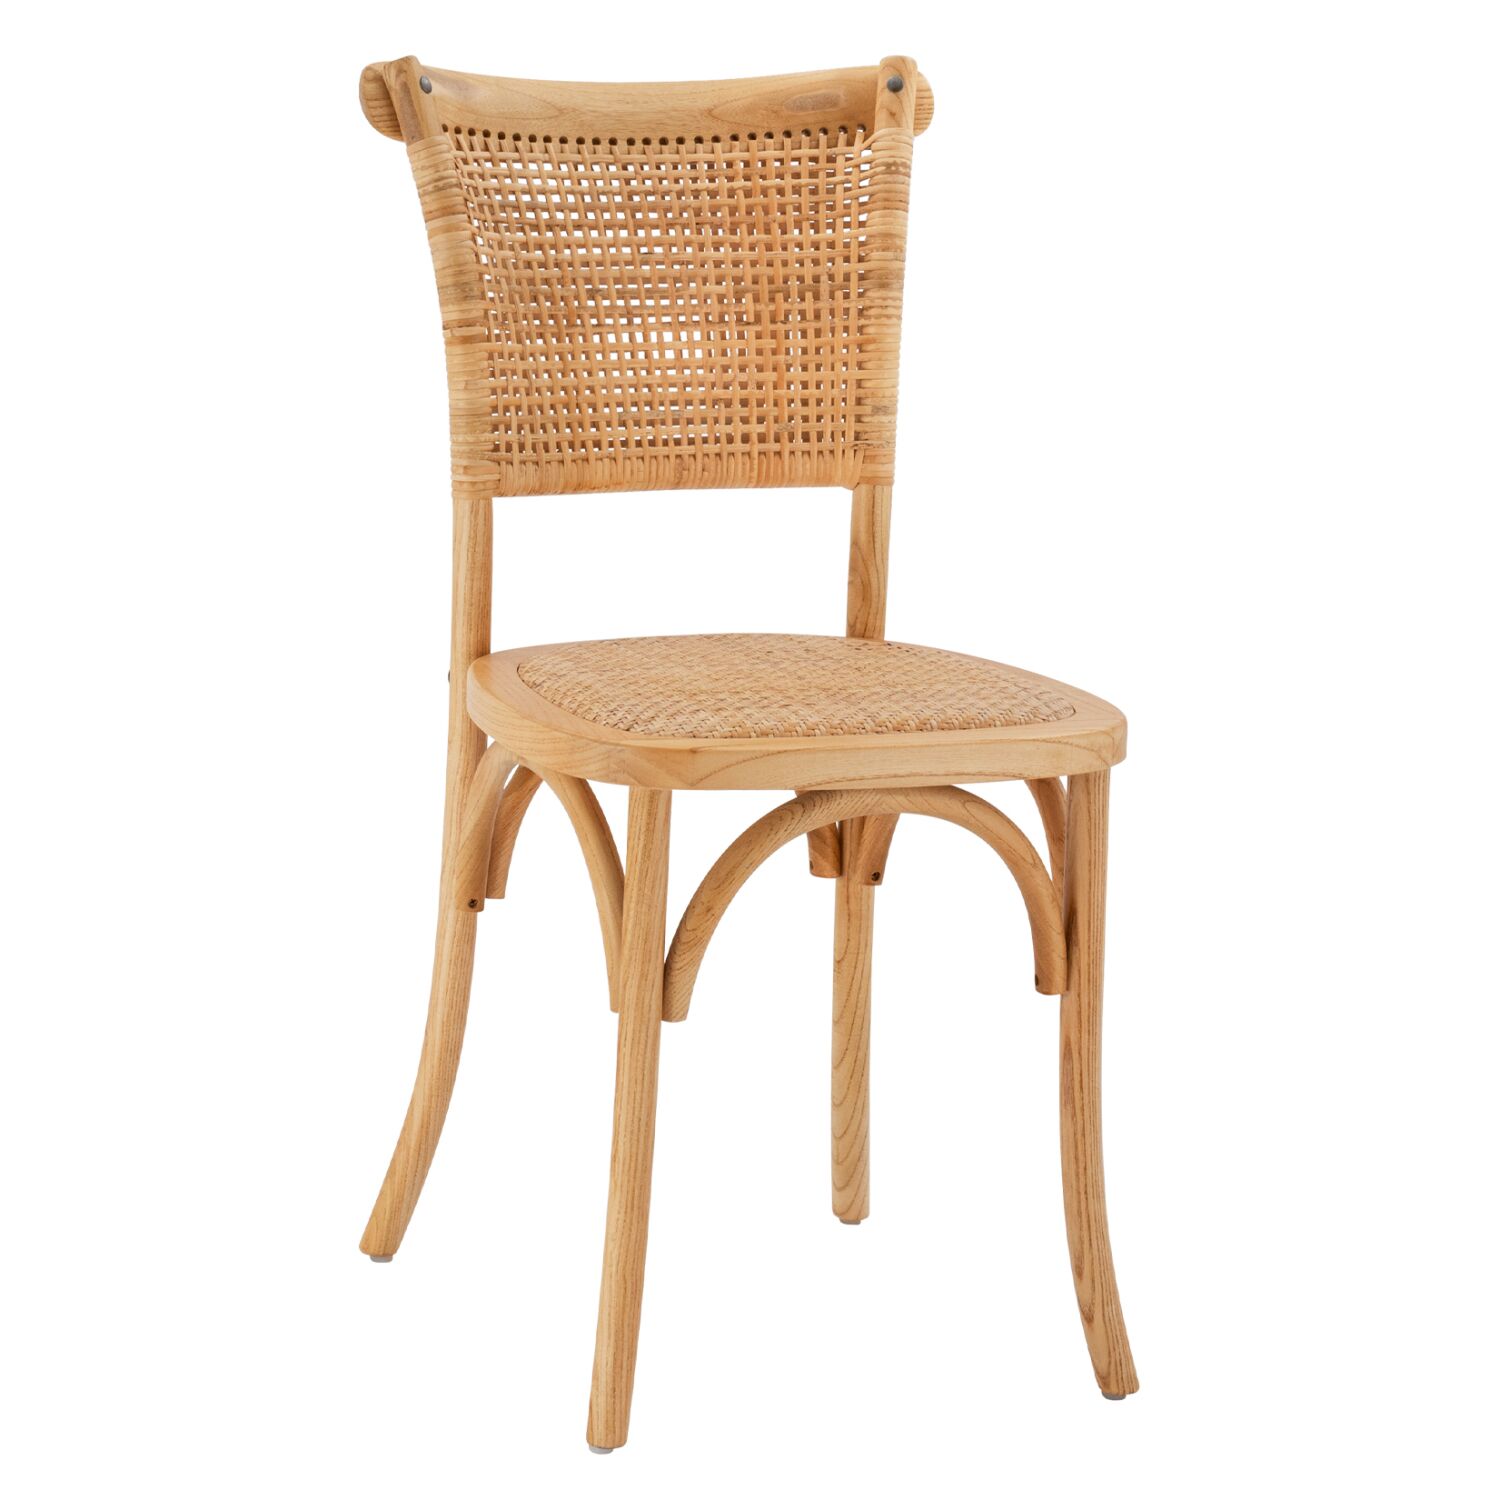 Wooden chair with rattan in natural shade HM8752.01 49x54x89cm